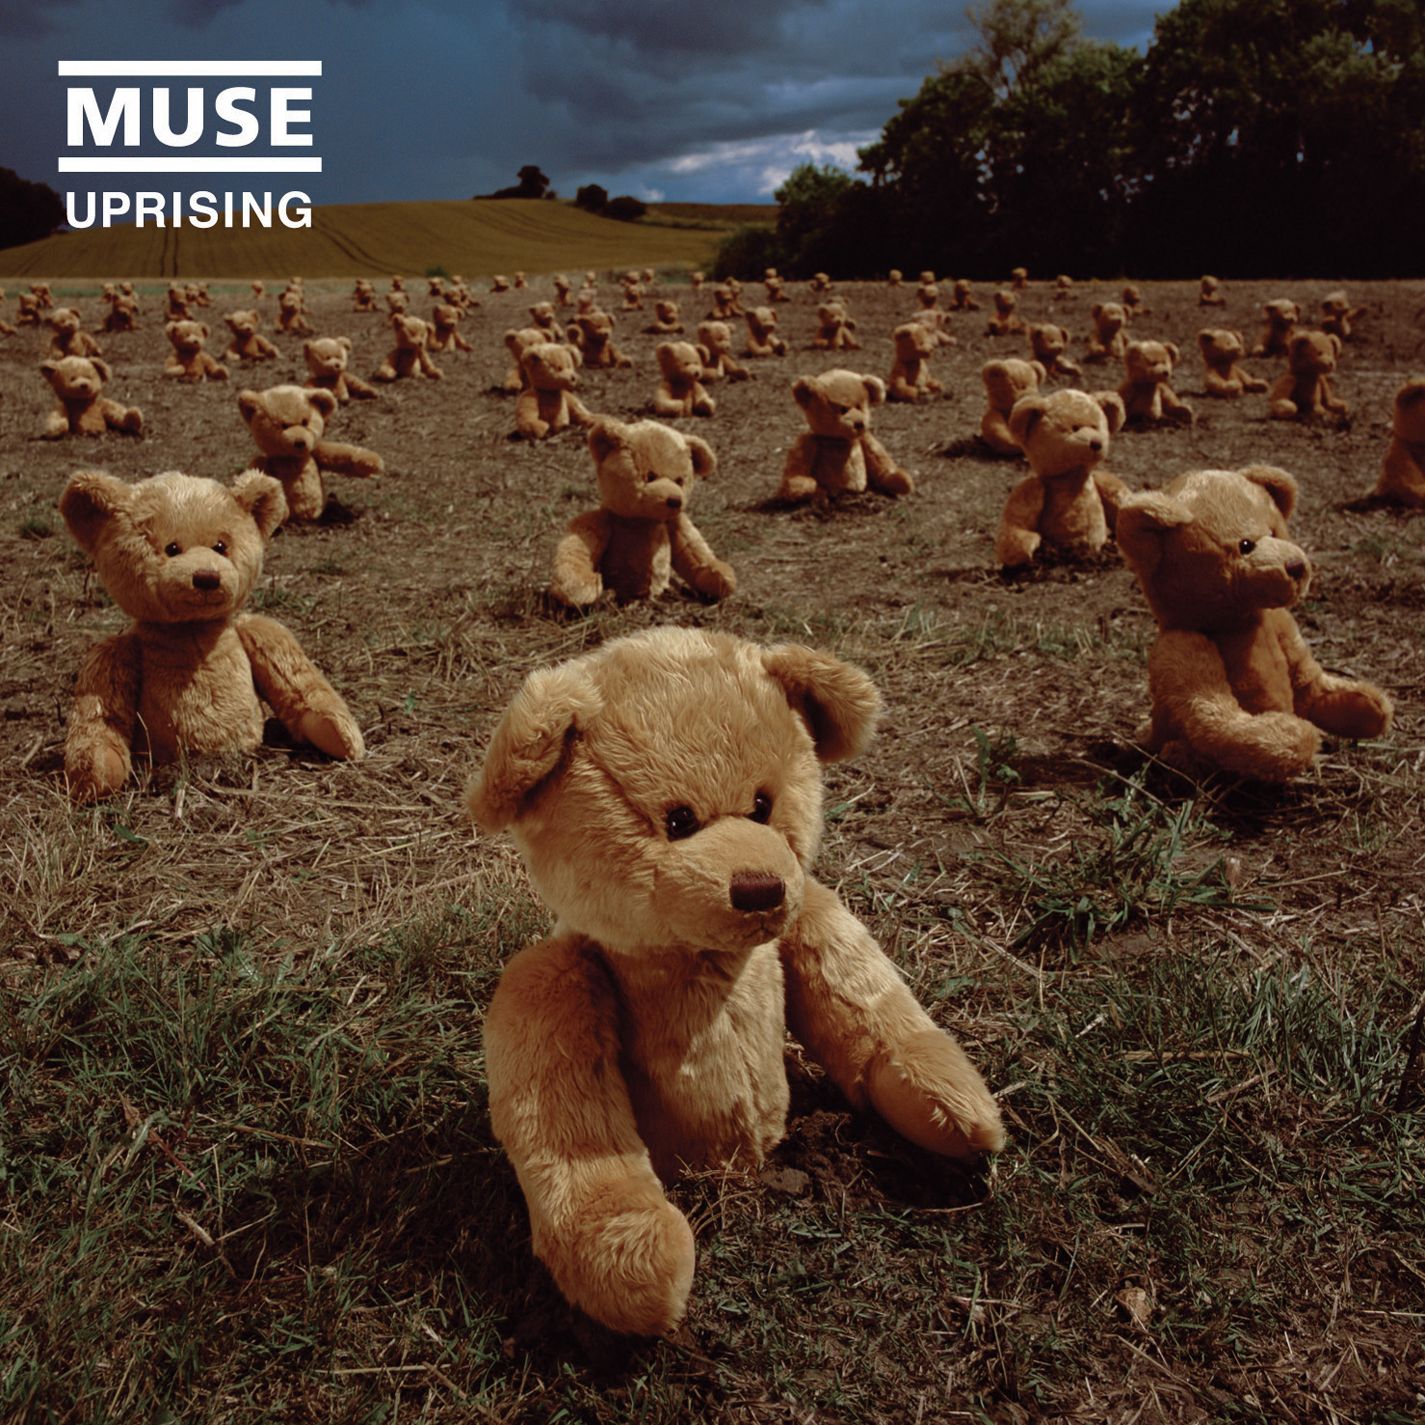 A photo of the CD version cover for Muse's single, "Uprising".